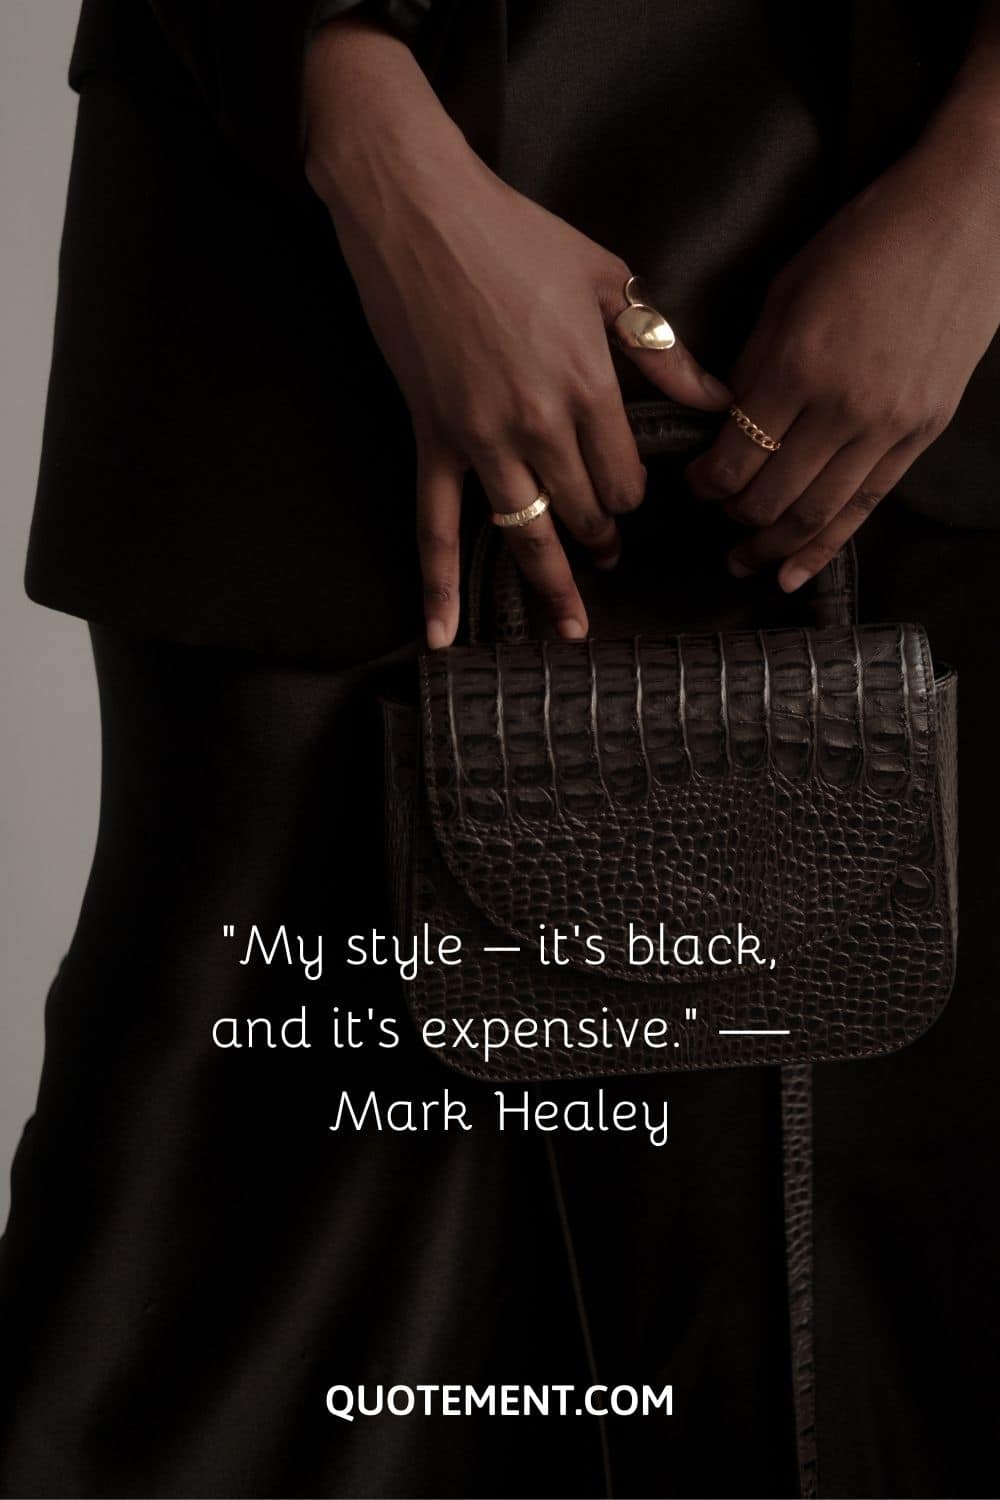 My style – it’s black, and it’s expensive.